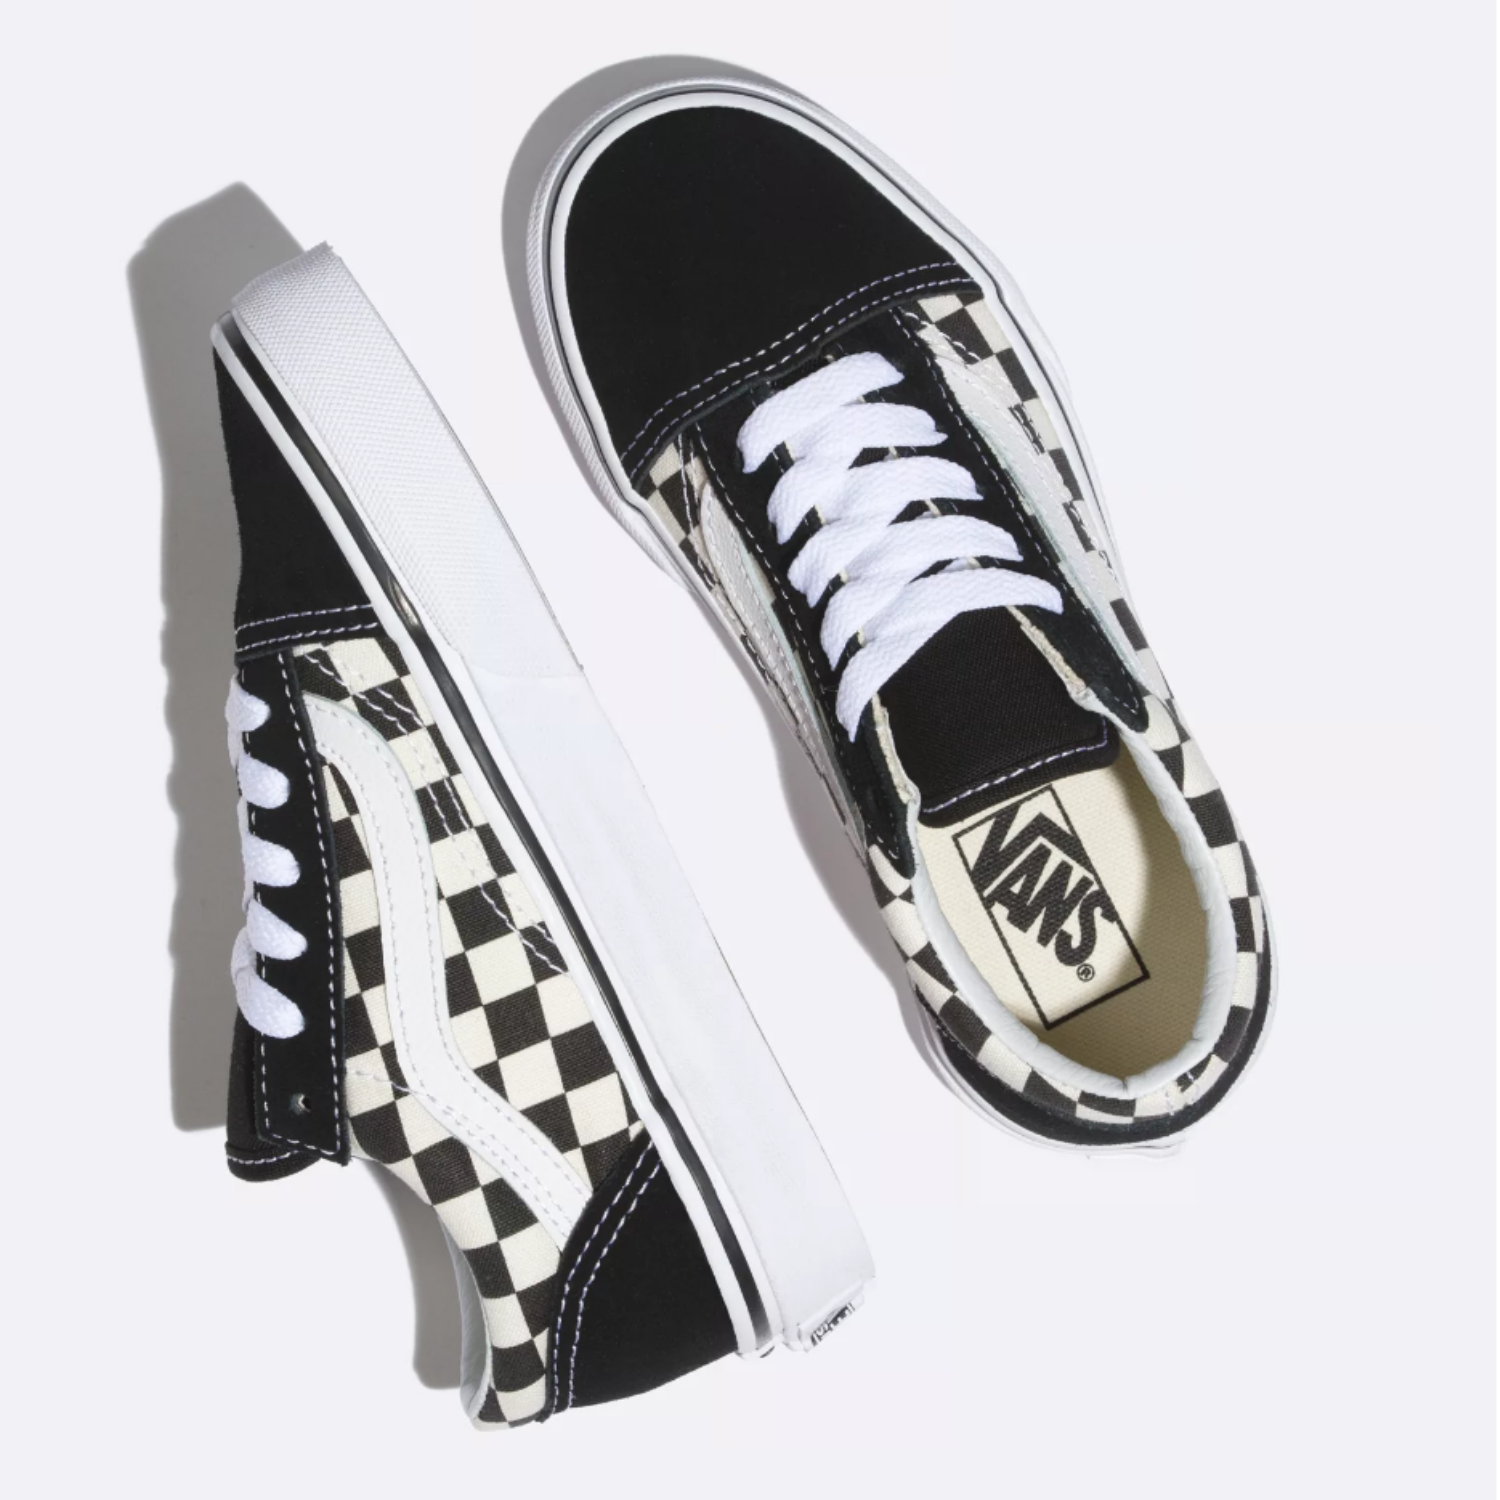 checkerboard vans youth